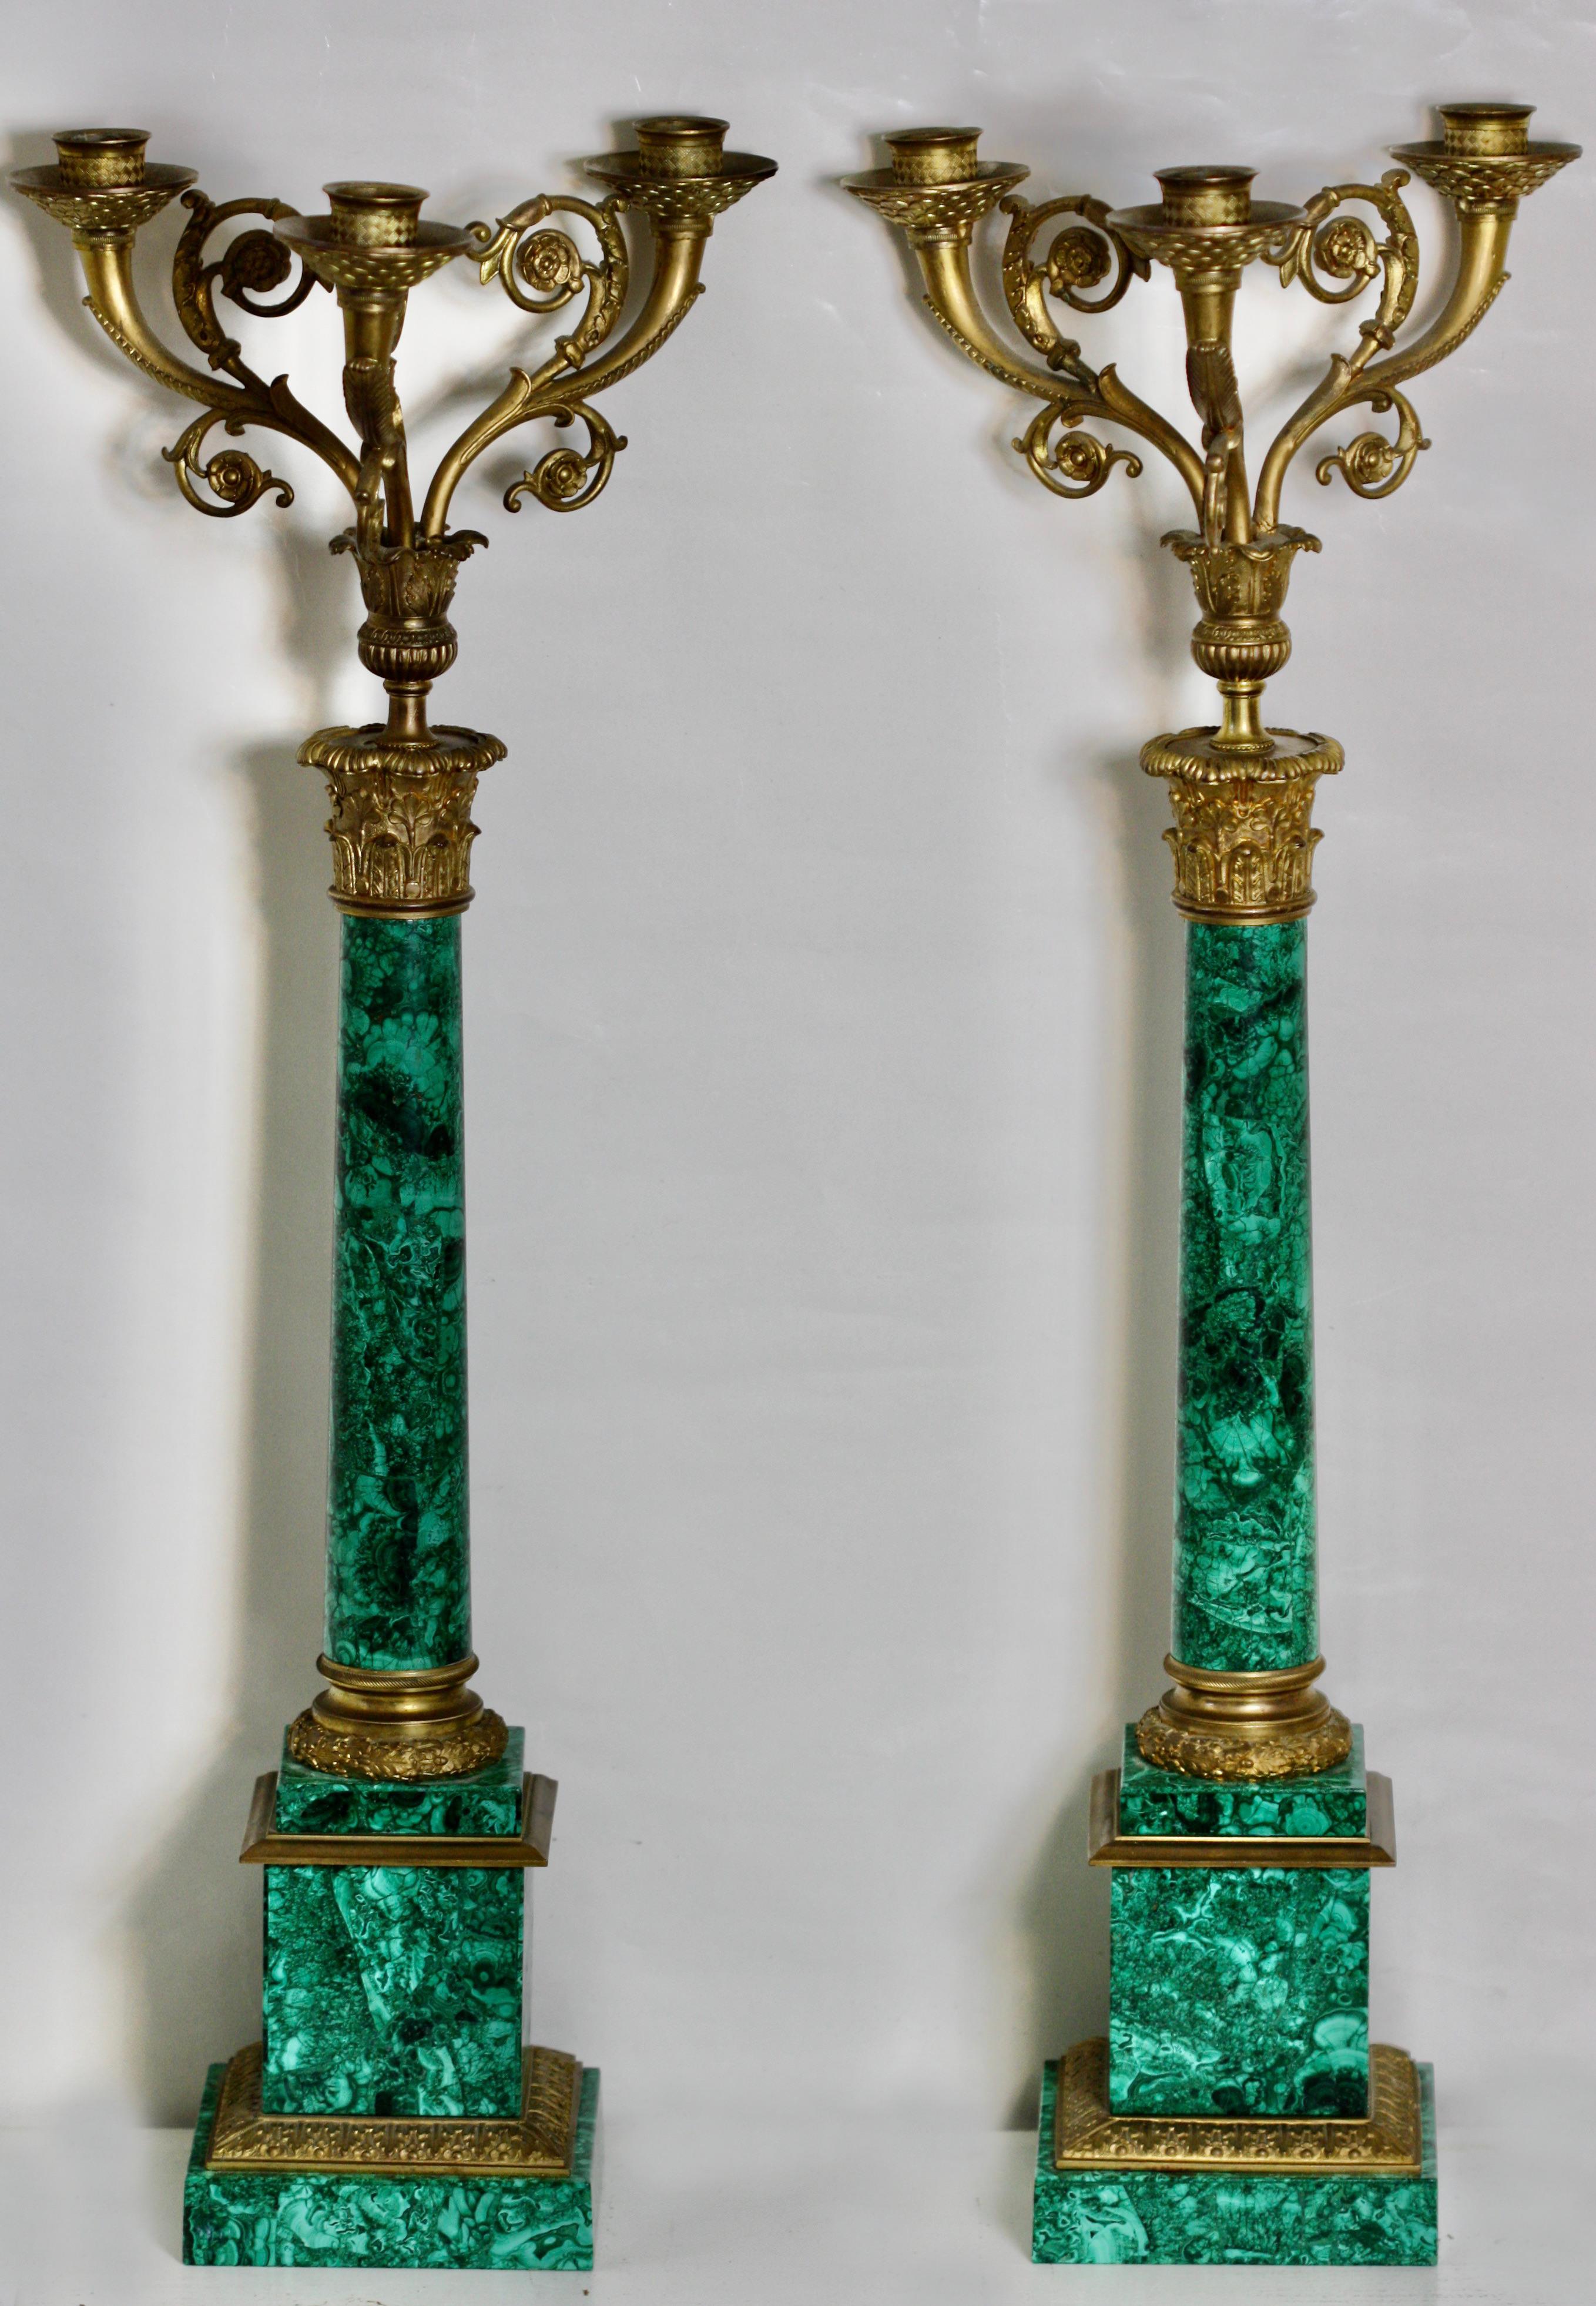 19th Century Pair of Russian Style Gilt-Bronze Mounted Malachite Three-Light Candelabra For Sale